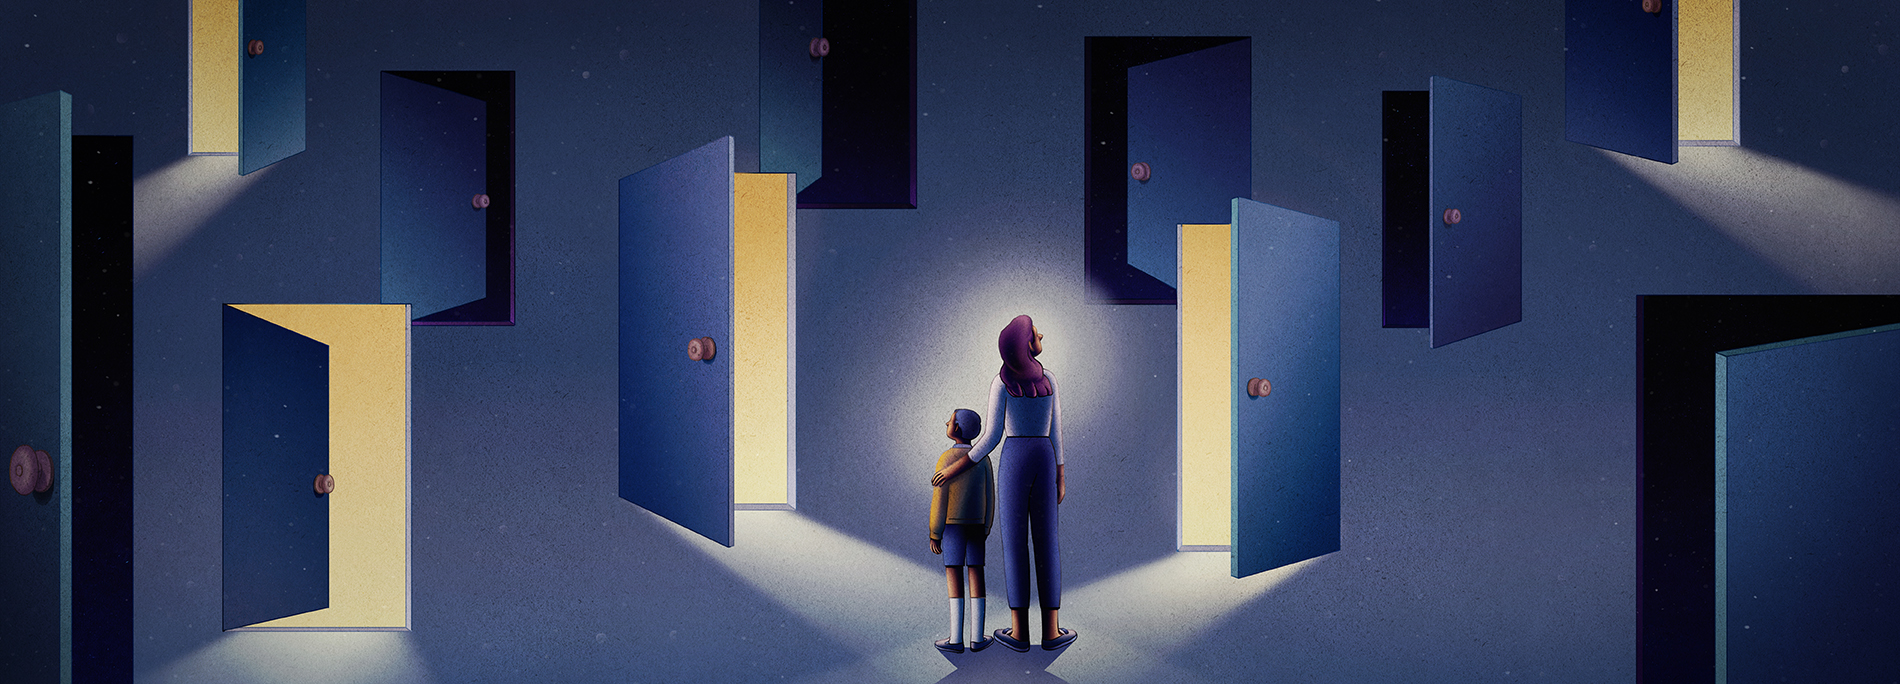 Illustration depicts mother and child facing a field of doors: some are dark and some are light